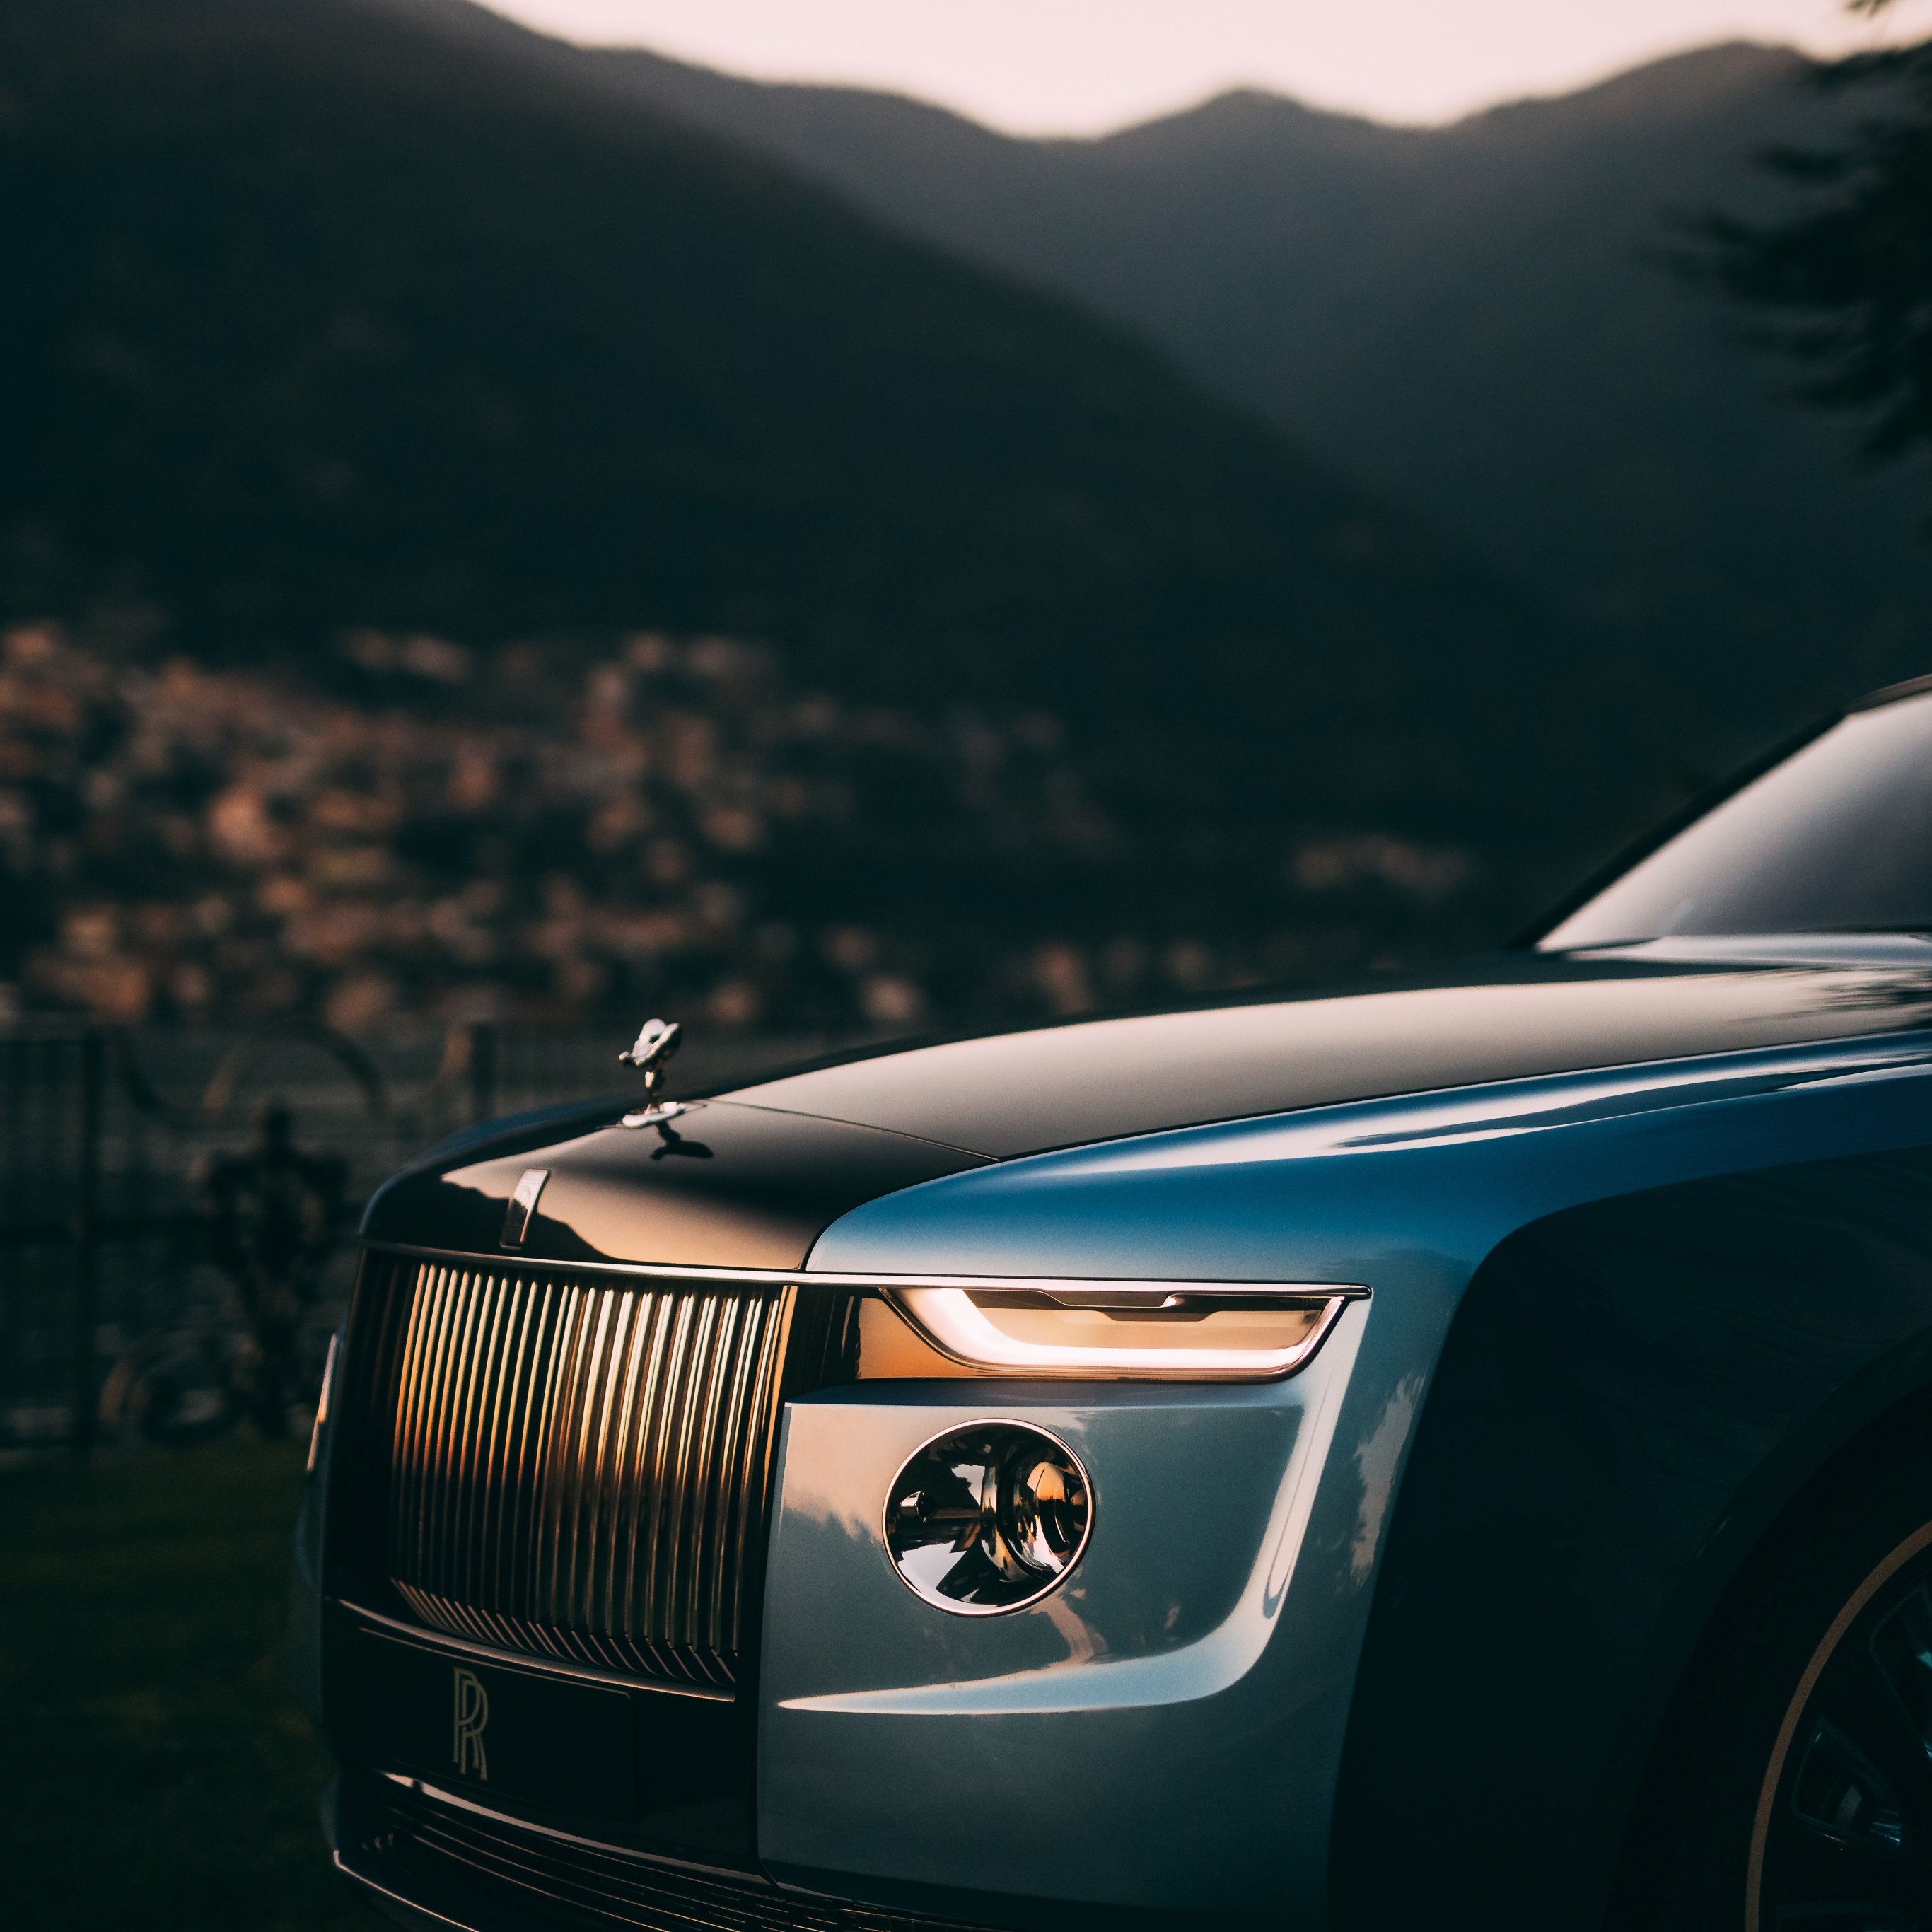 750 Luxury Car Pictures HD  Download Free Images  Stock Photos on  Unsplash